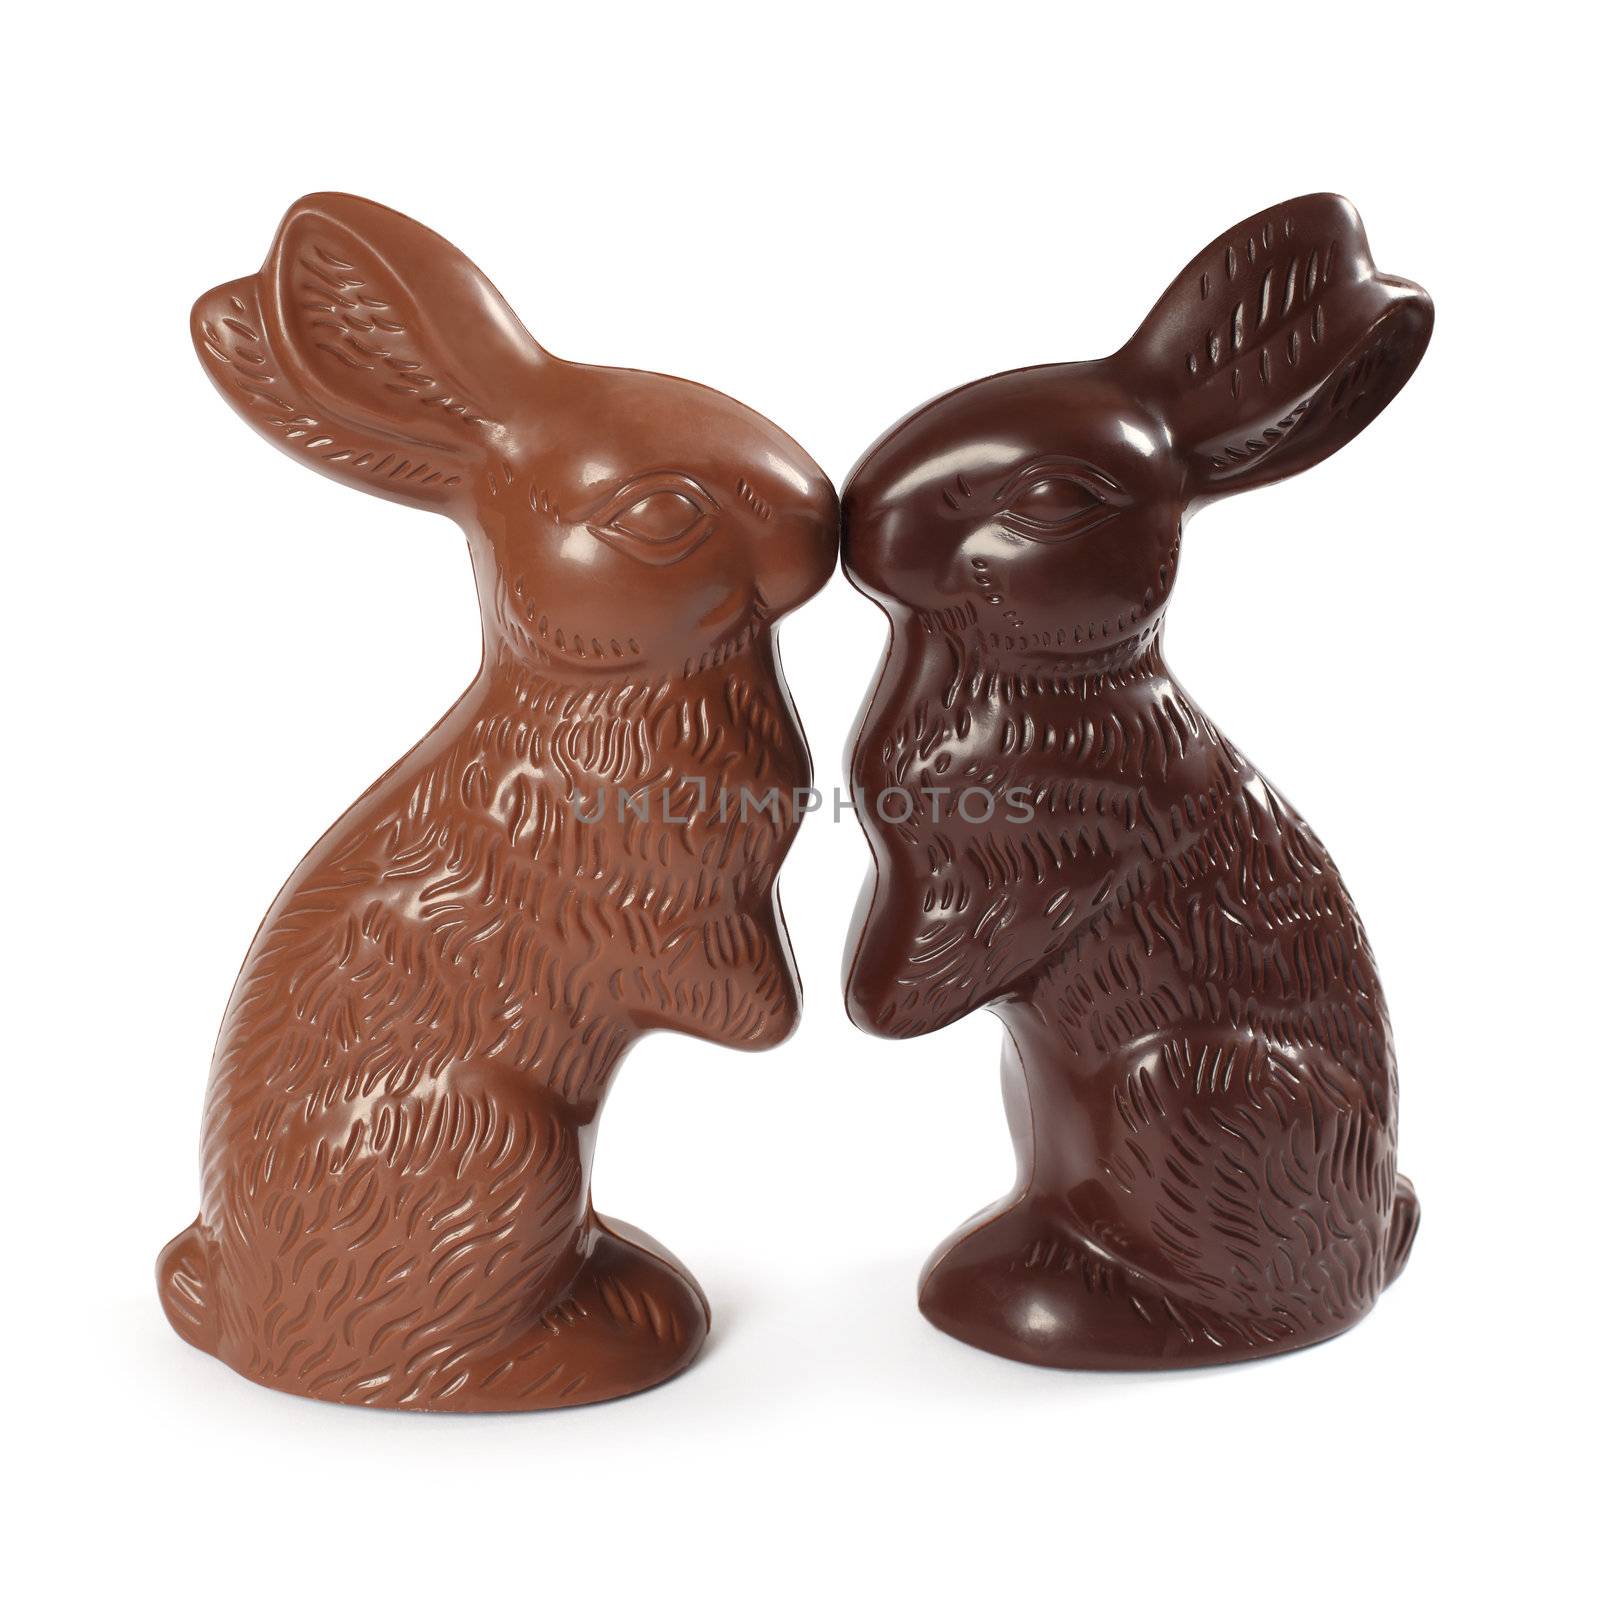 Chocolate Easter bunnies kissing by sumners